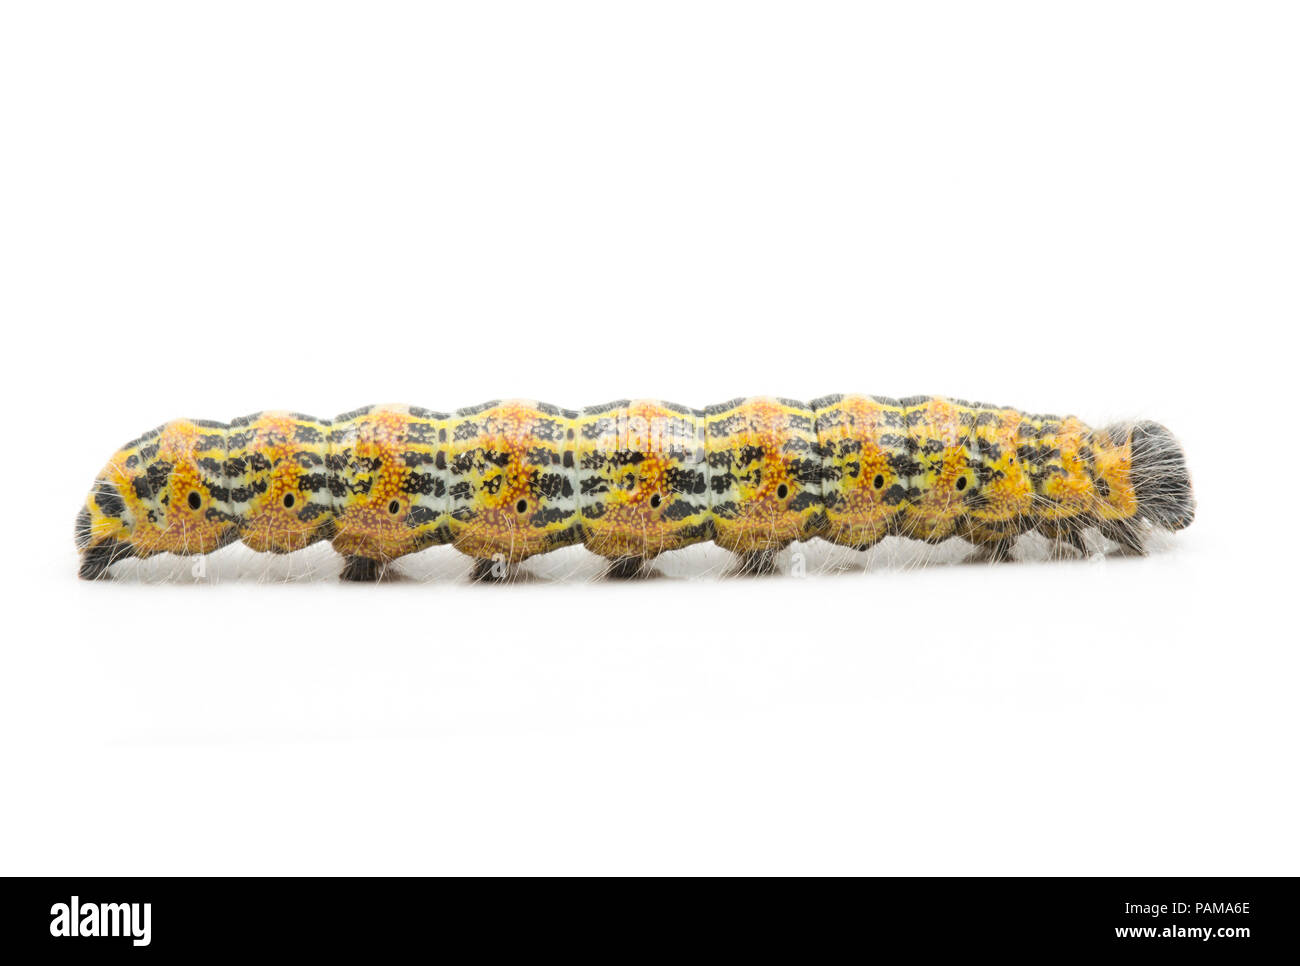 A Buff-Tip moth caterpillar, Phalera bucephala, found  on sallows near a supermarket in North Dorset UK. In large numbers they can defoliate trees. Stock Photo